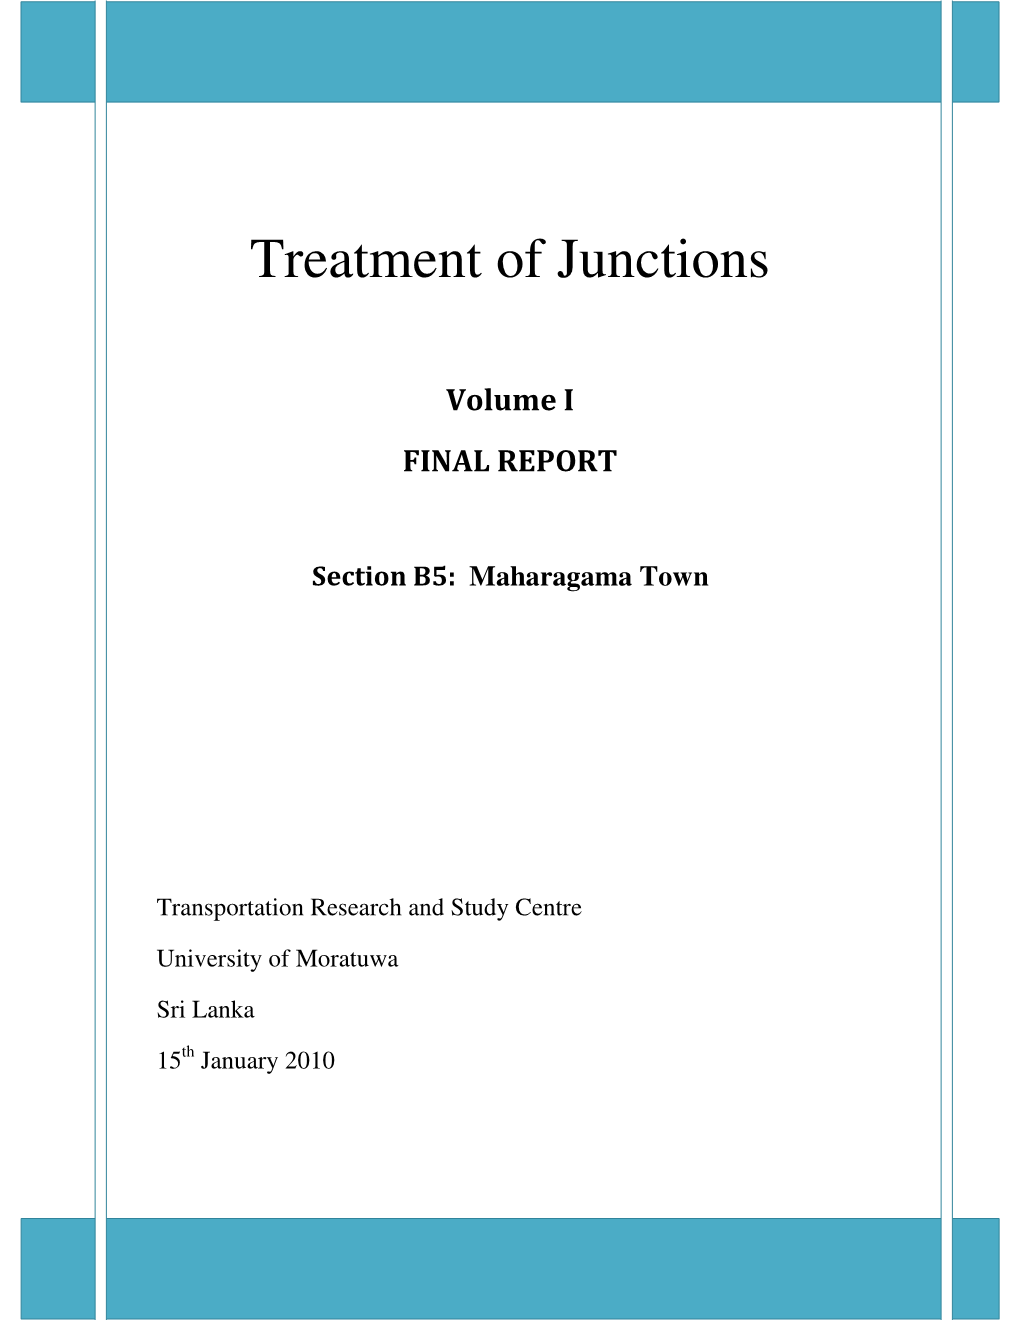 Treatment of Junctions